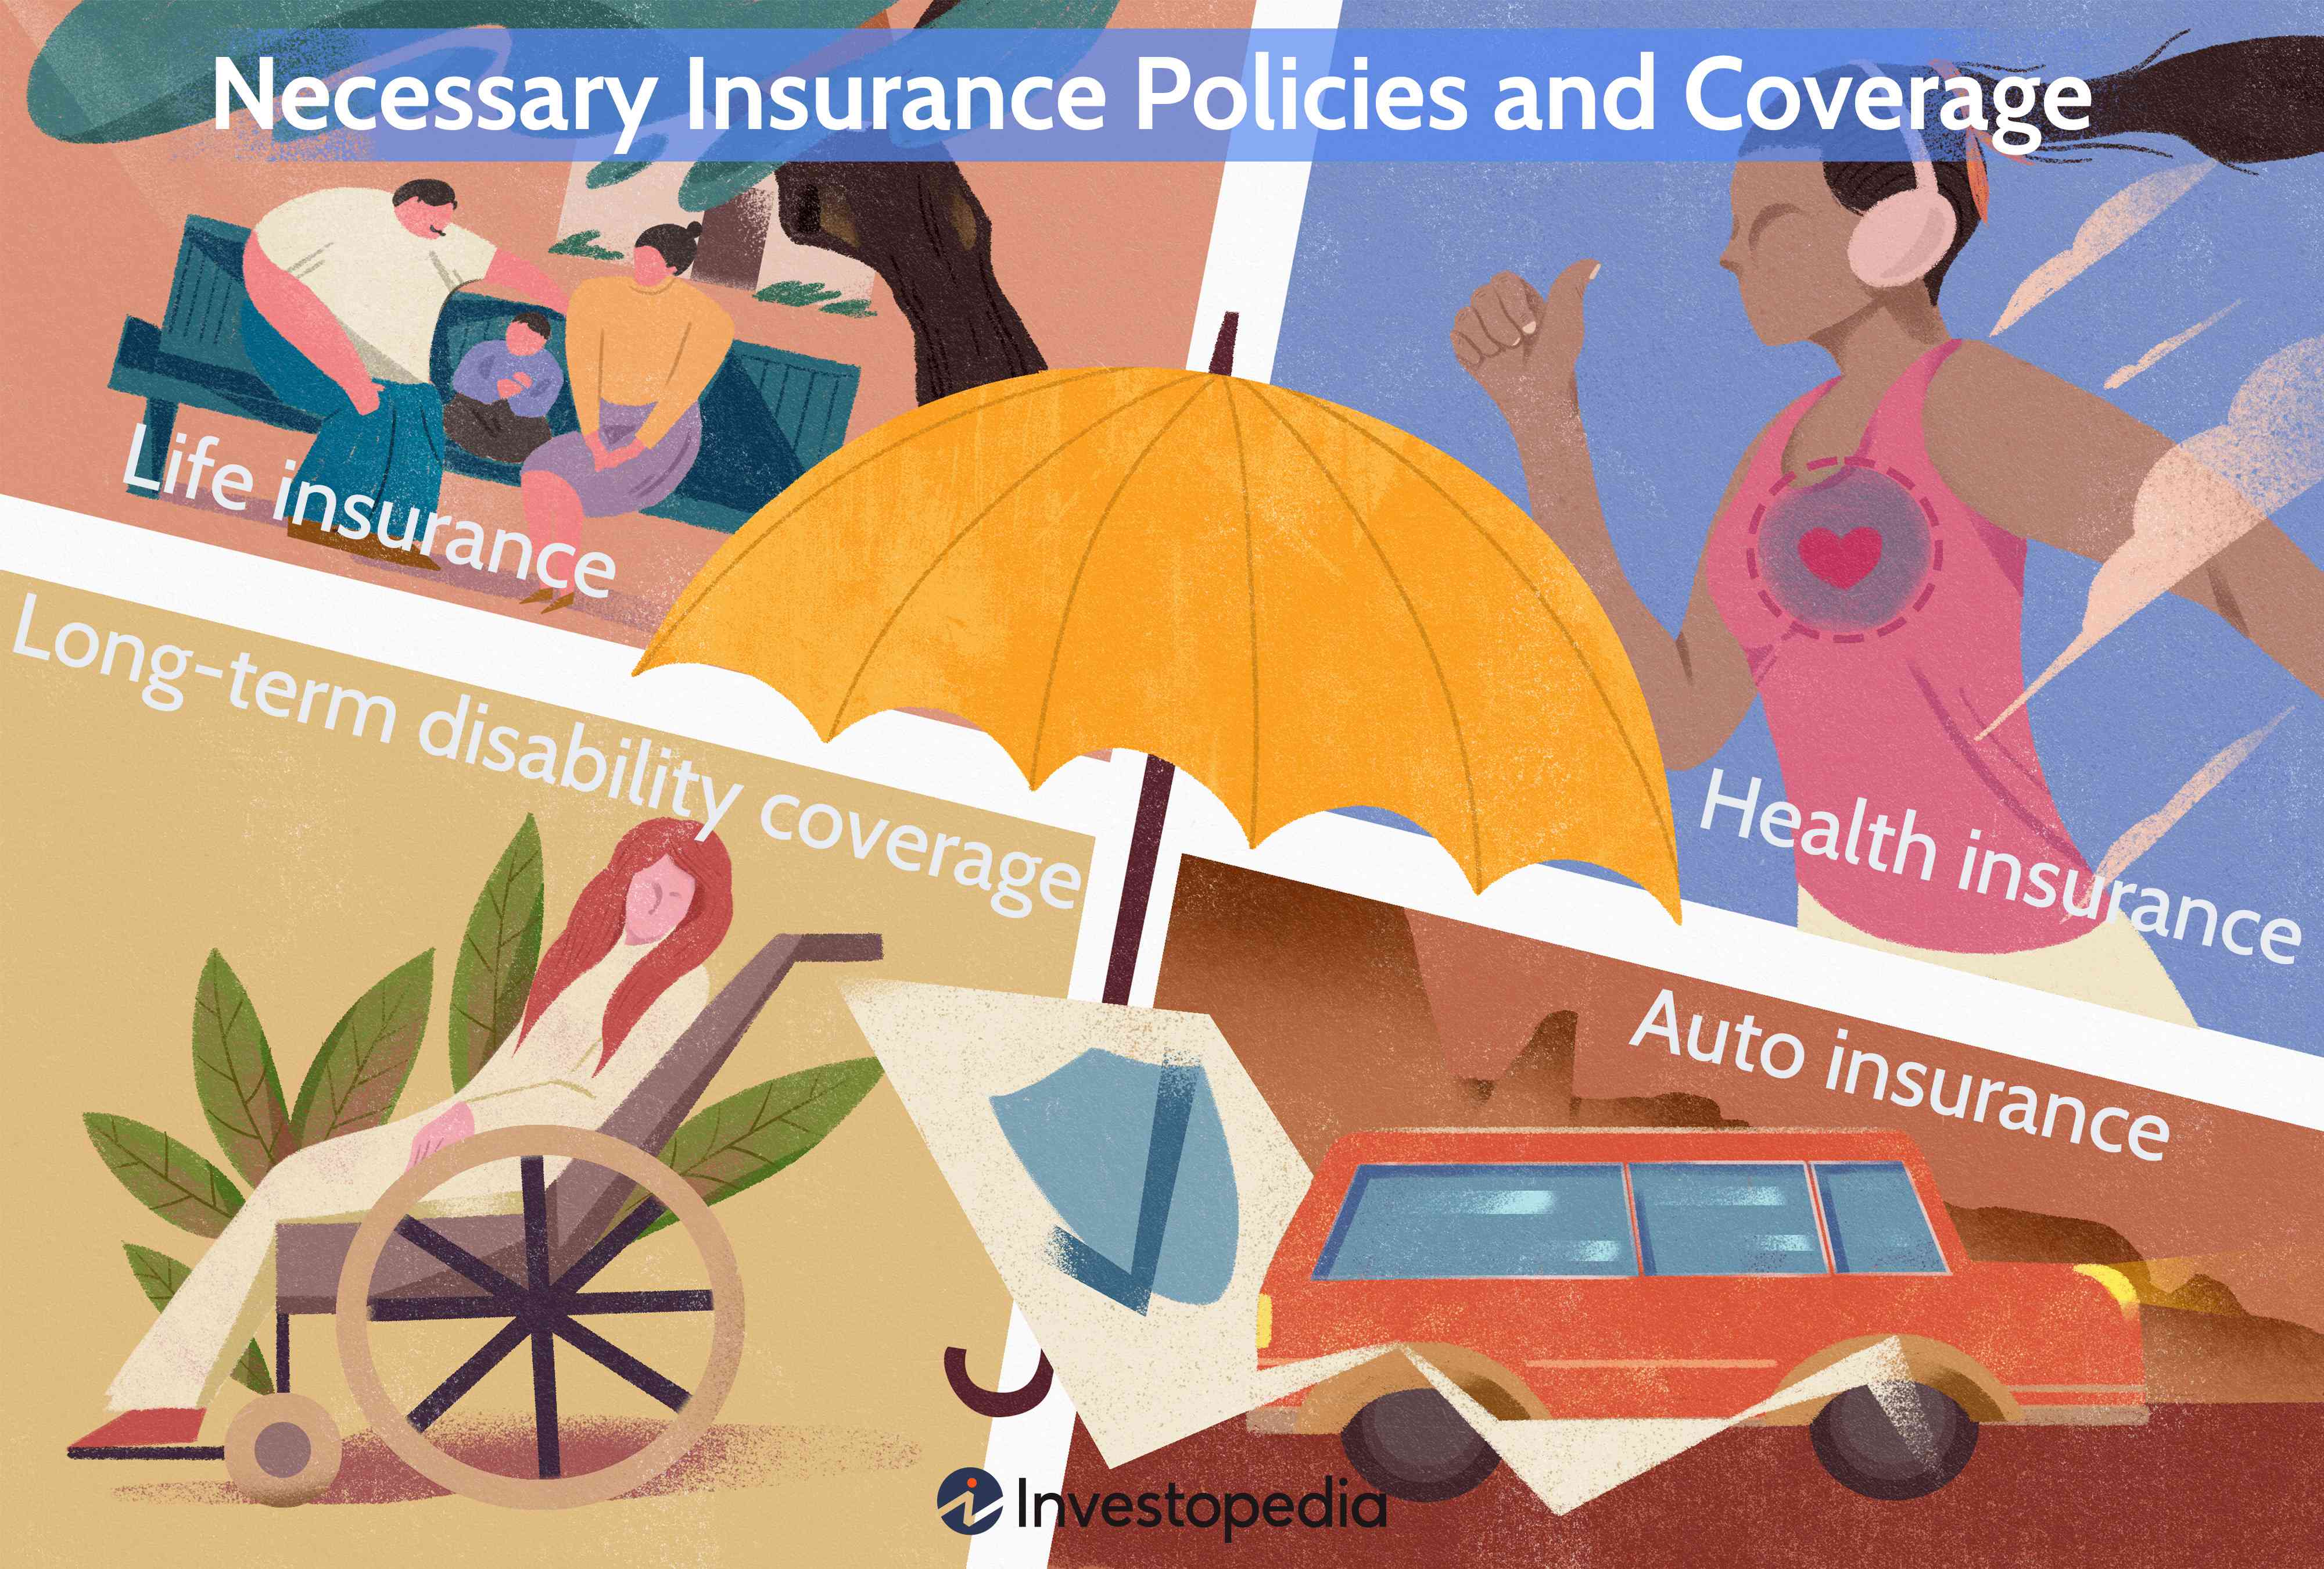 Necessary Insurance Policies and Coverage